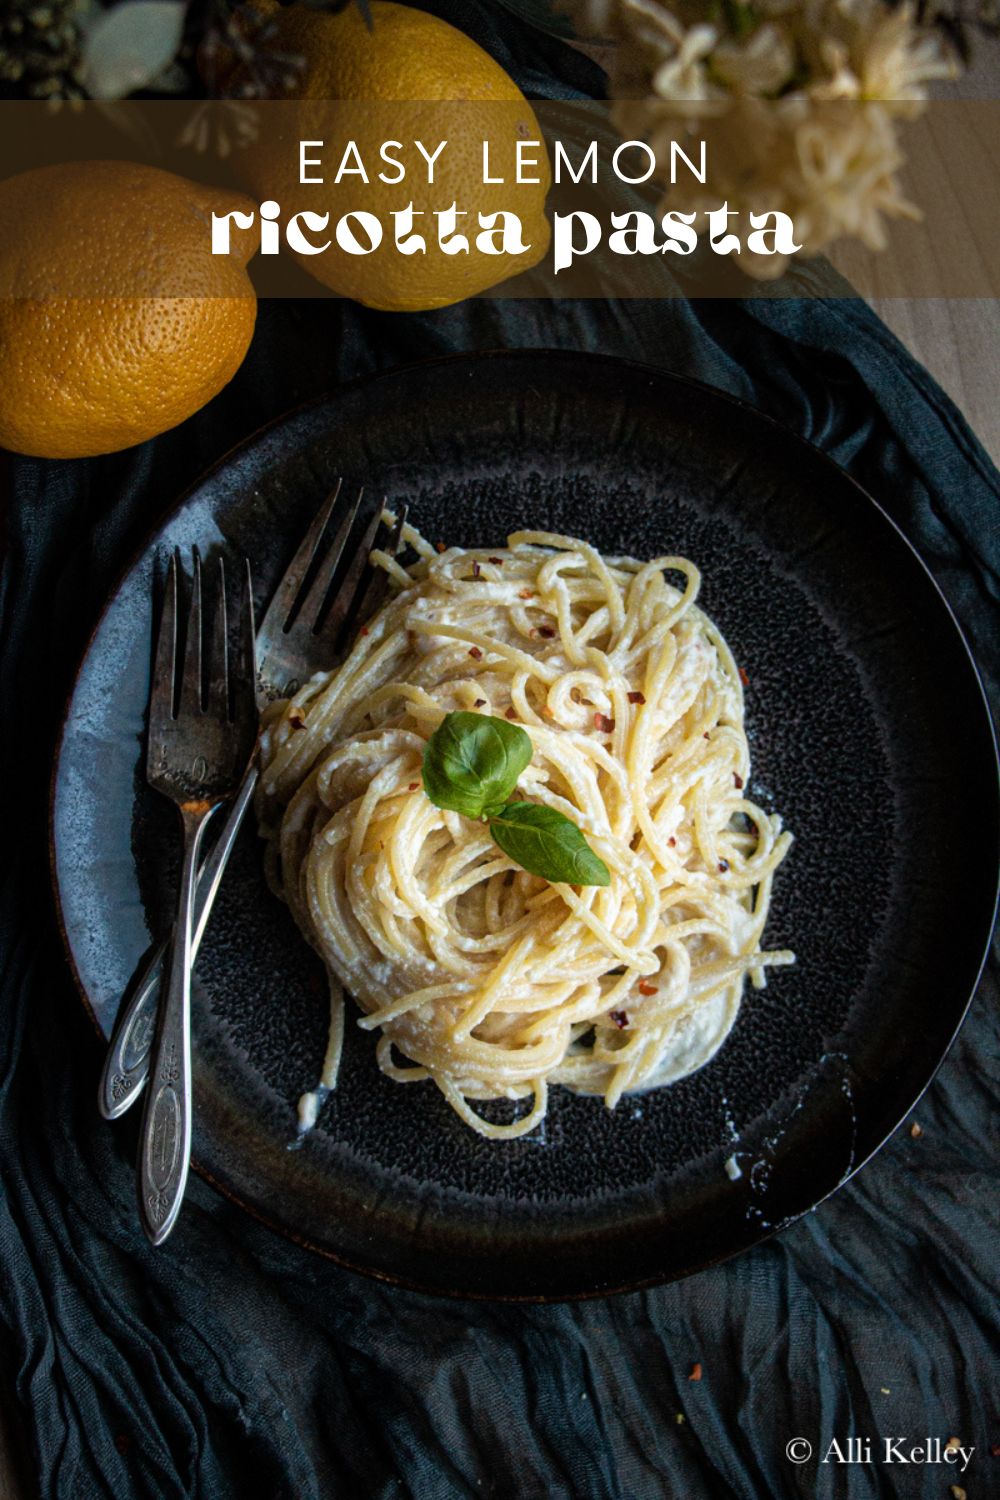 For a quick meal that is simple yet scrumptious - you have to try this lemon ricotta pasta! The sweet, zesty lemon flavor combined with creamy ricotta cheese is a match made in heaven. Plus, this dish is effortless to make and is the best way to spruce up a boring weeknight meal!